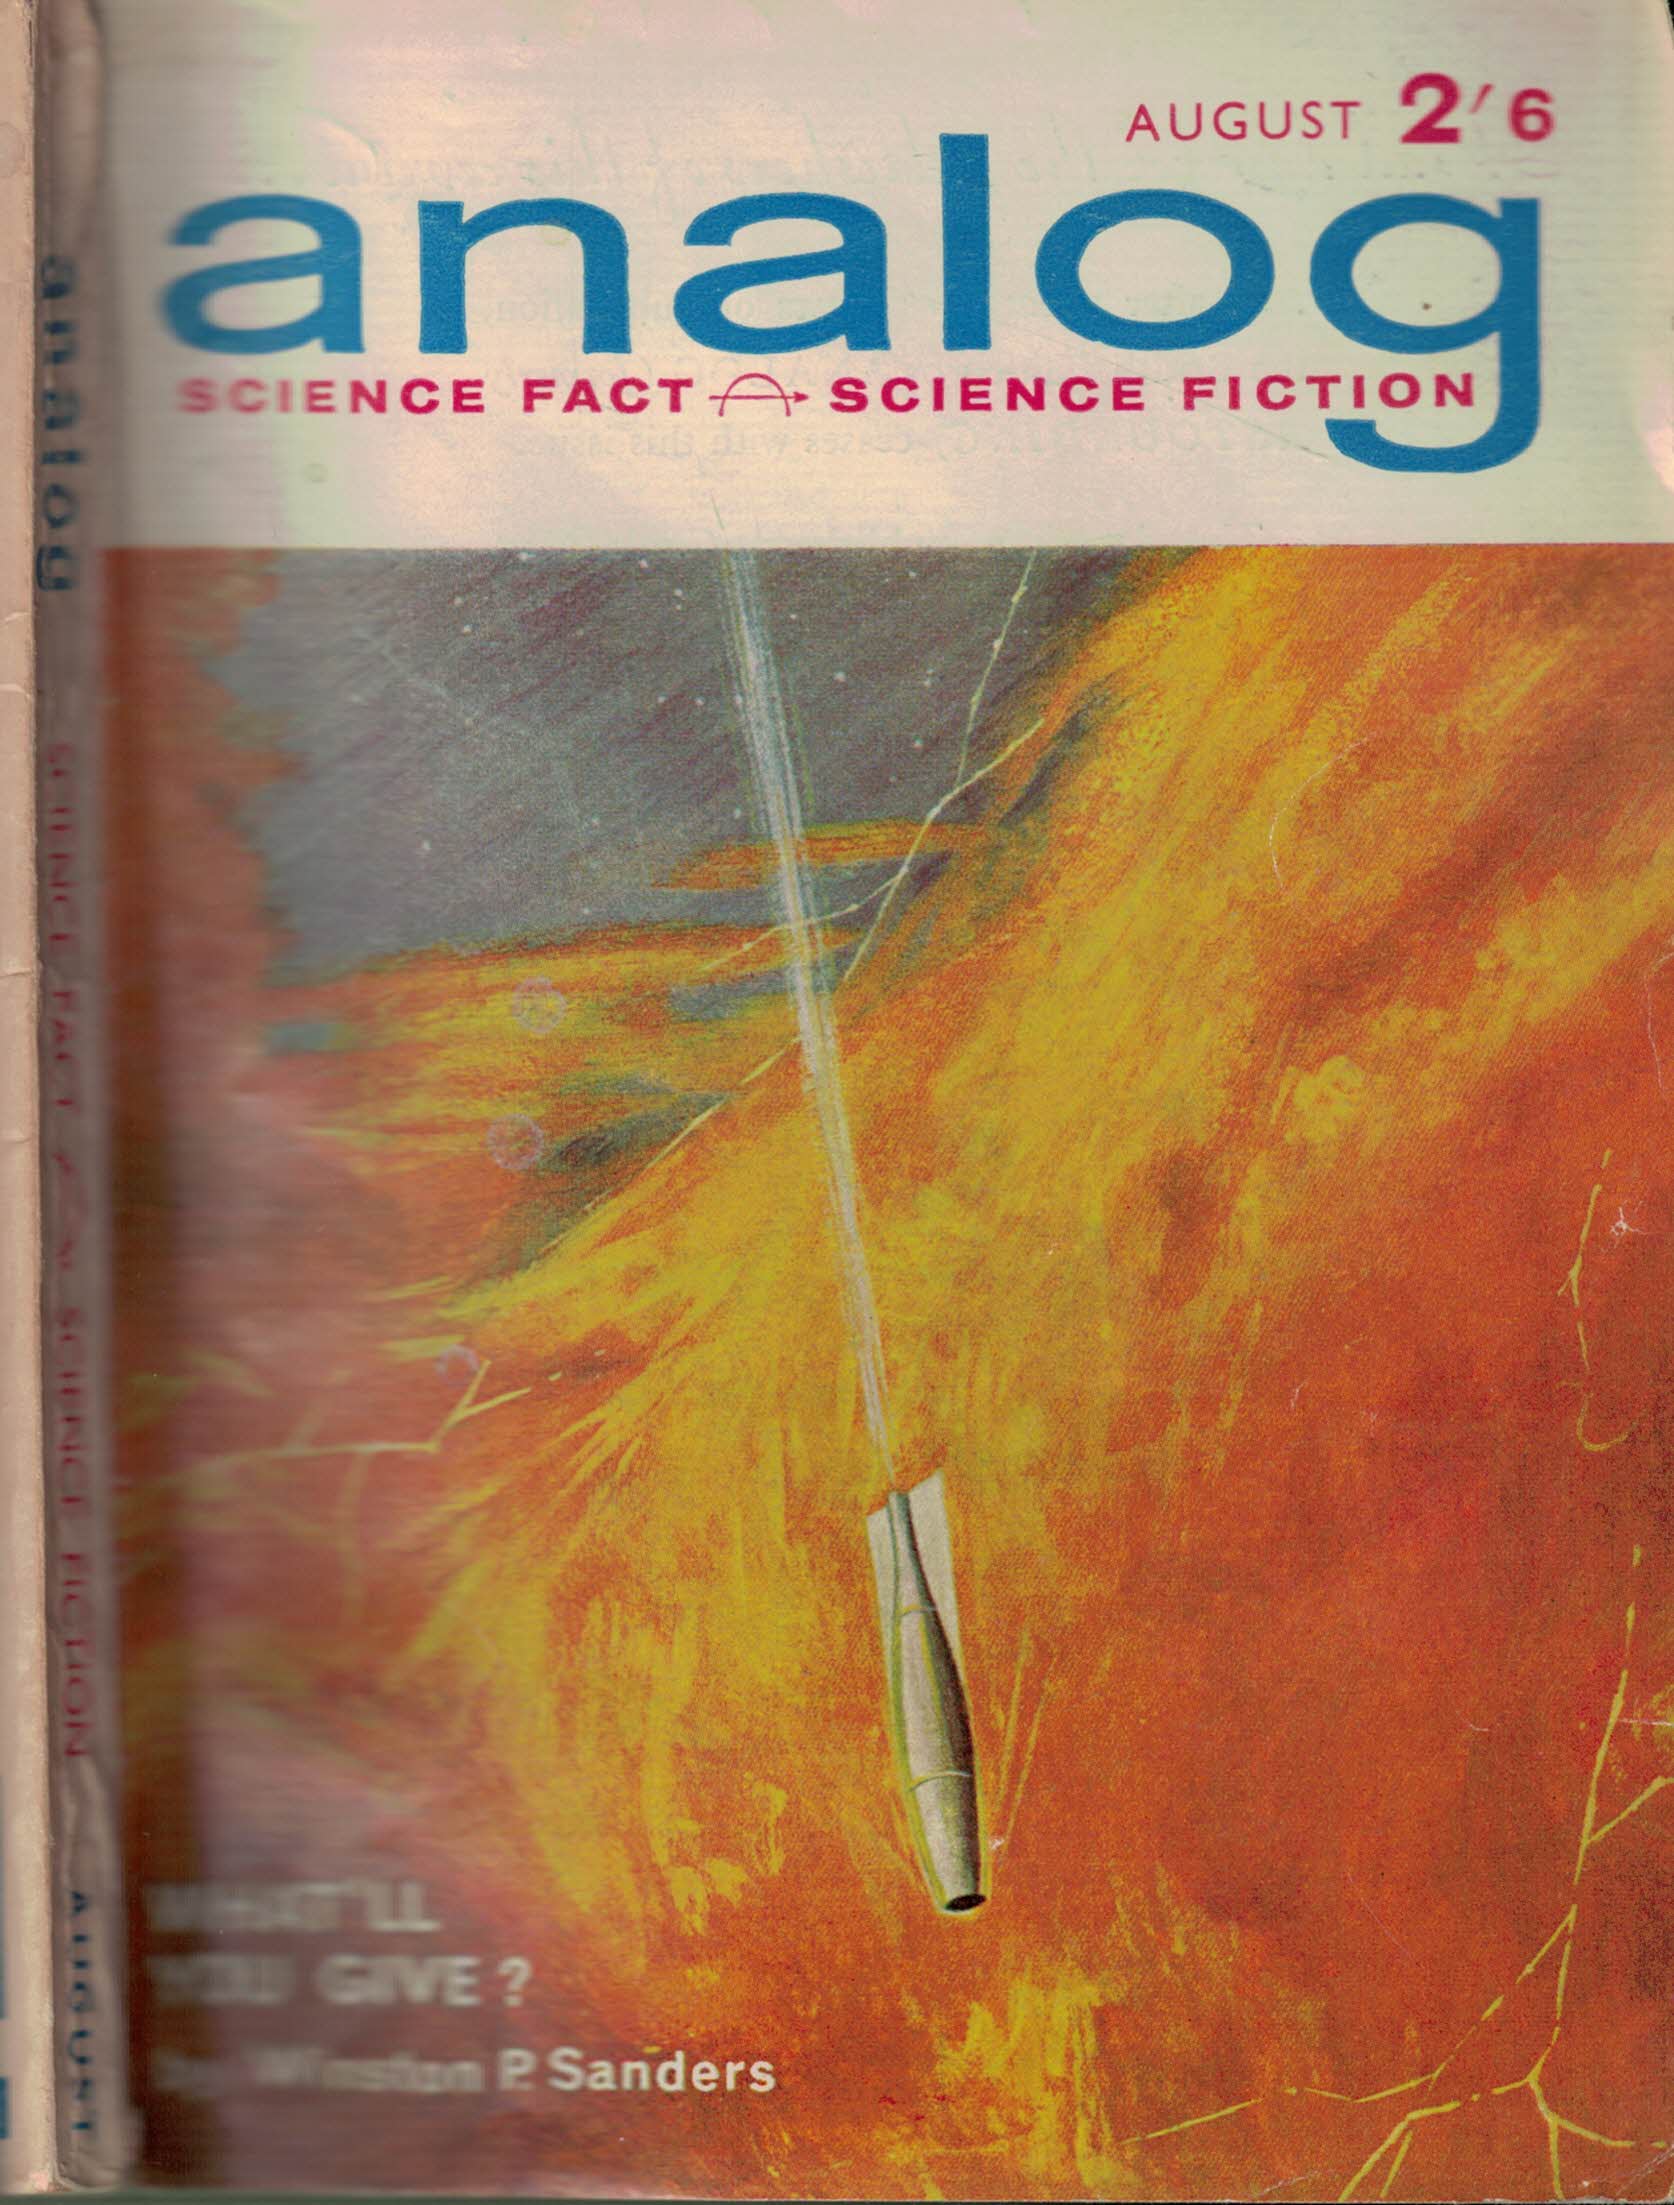 Analog. Science Fiction and Fact. Volume 19, Number 8. August 1963. British edition.